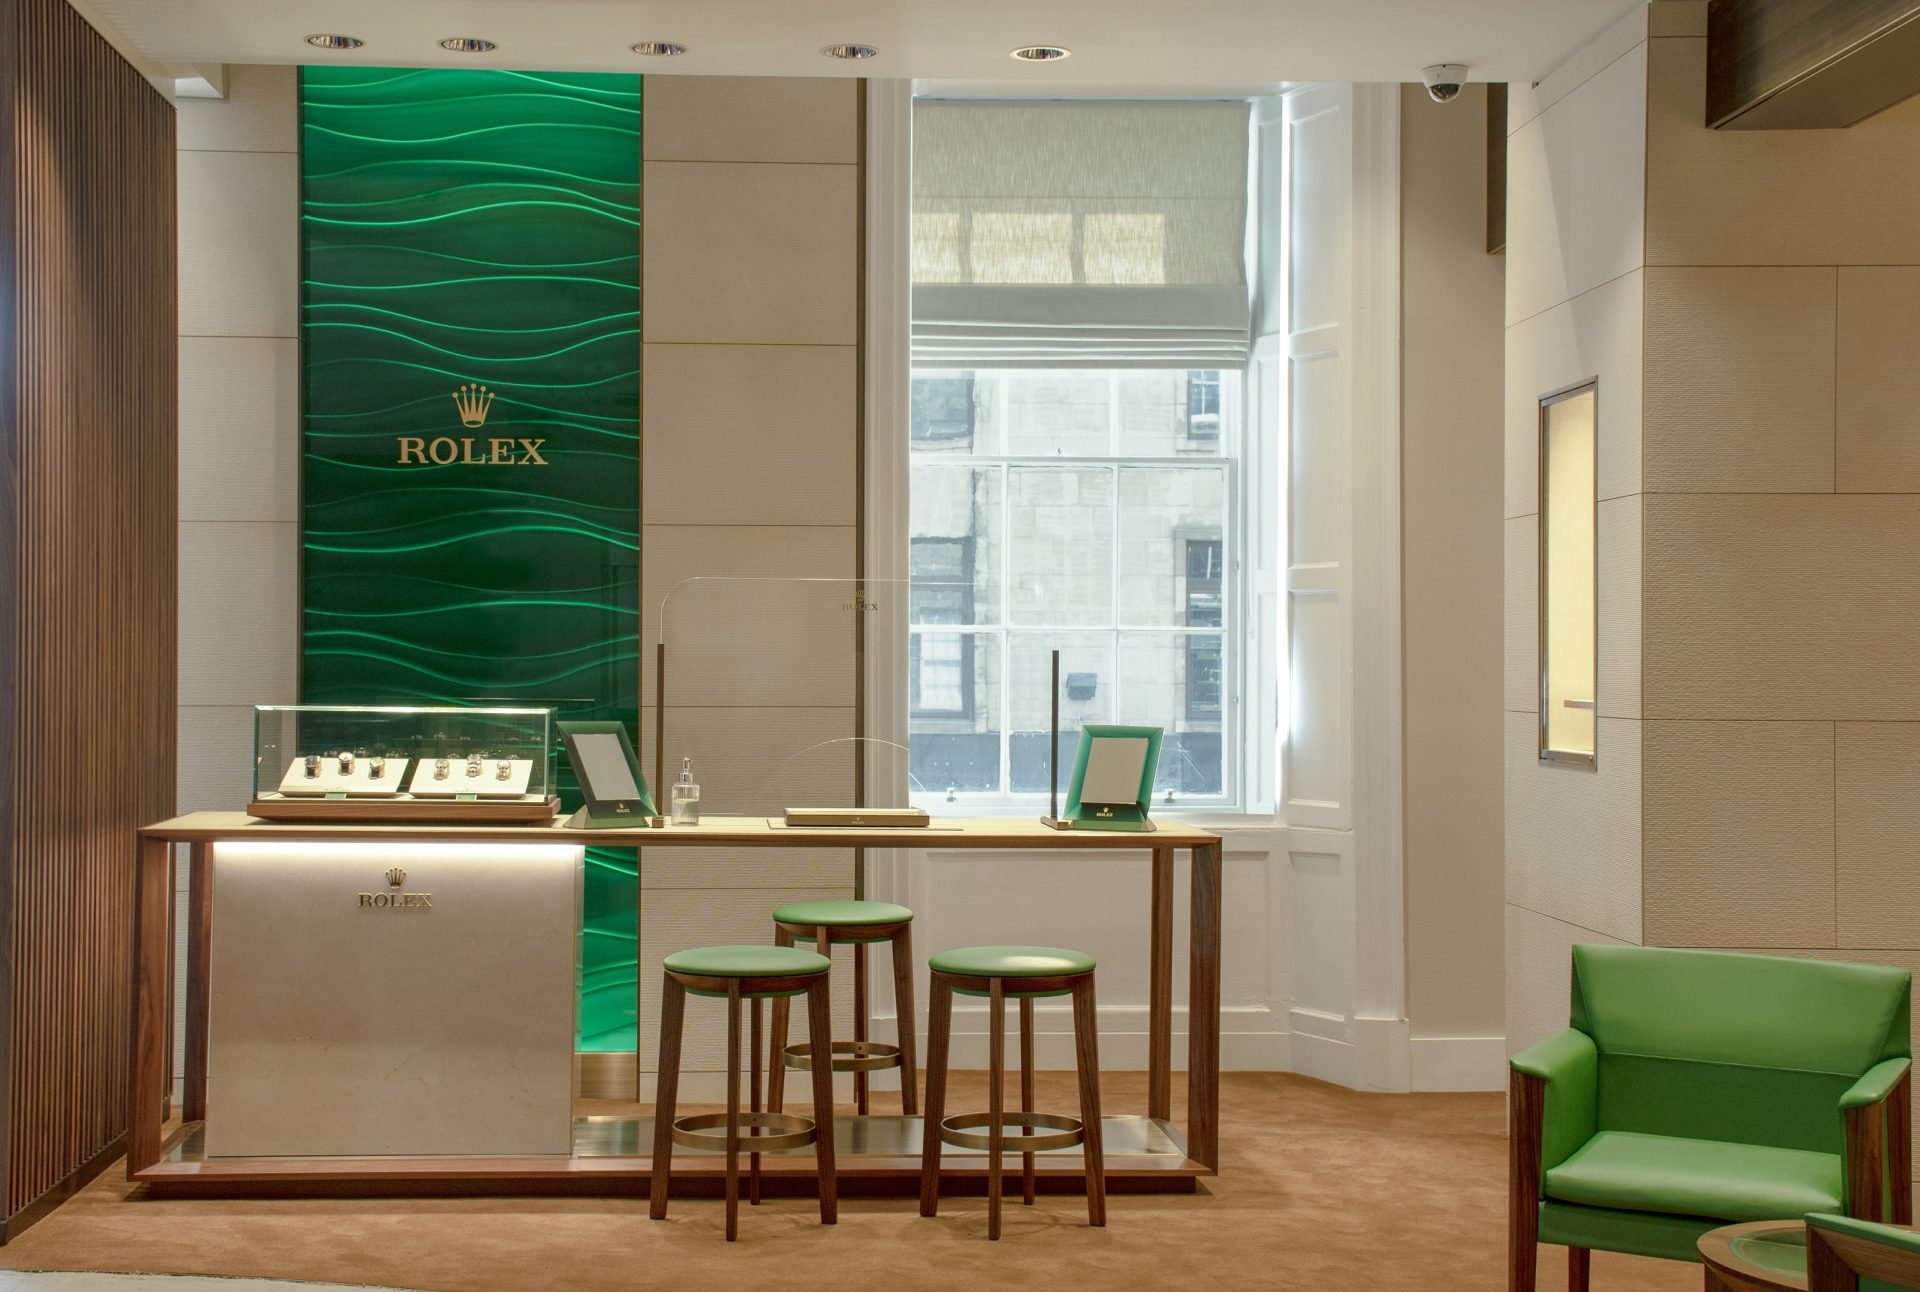 Laings edinburgh rolex shop in shop welcomes clients with the rich emerald green and gold associated with the iconic brand